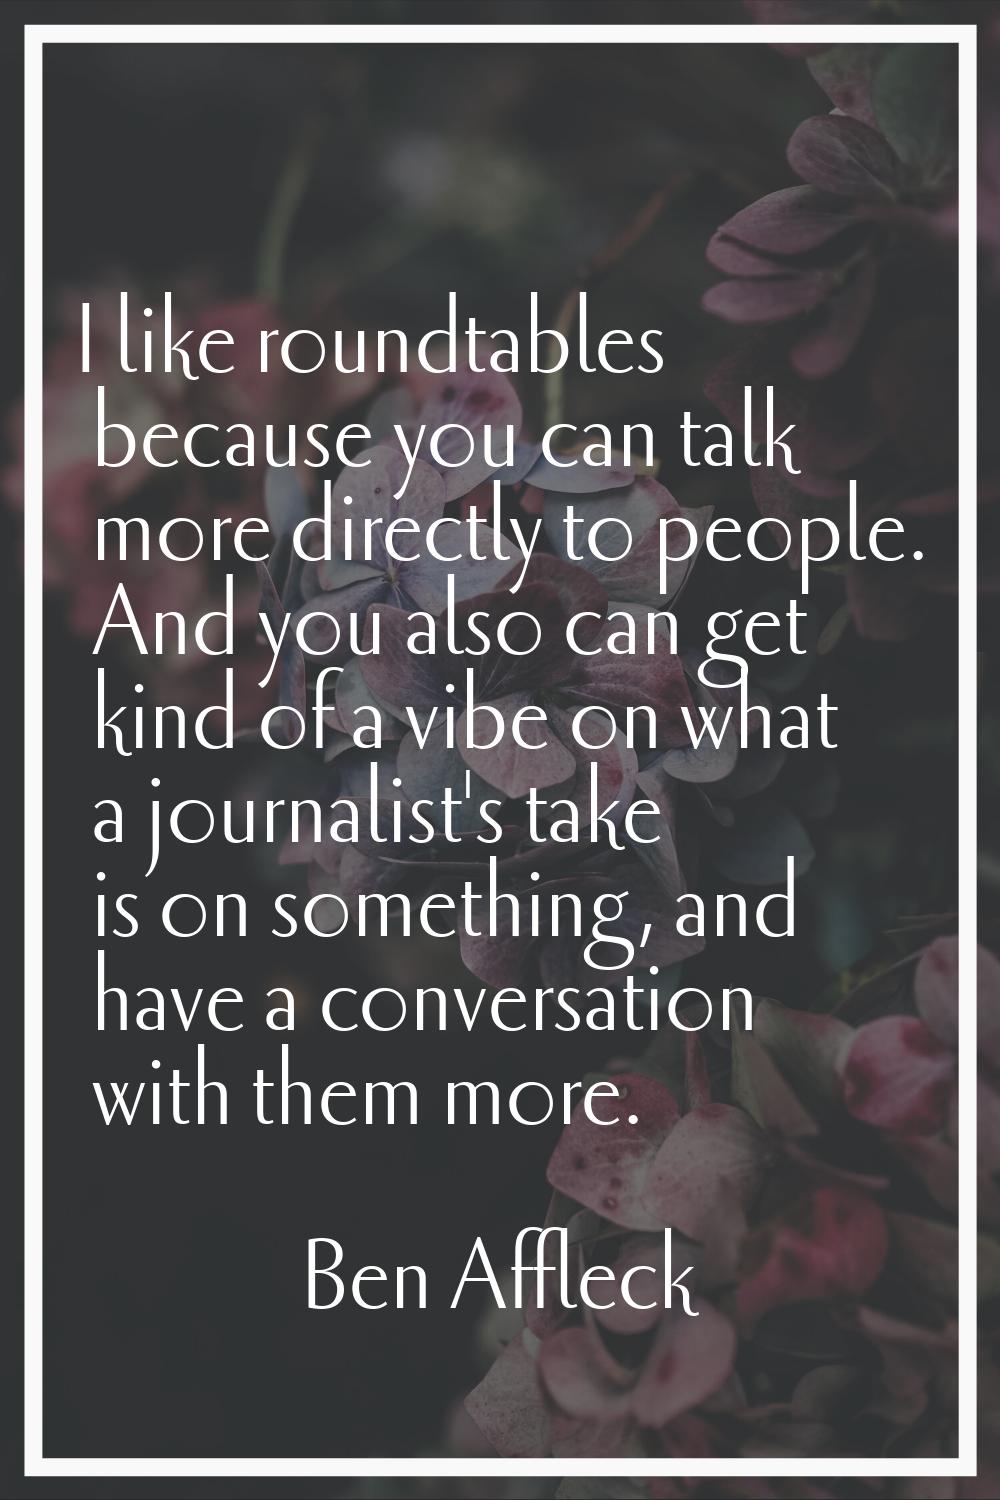 I like roundtables because you can talk more directly to people. And you also can get kind of a vib